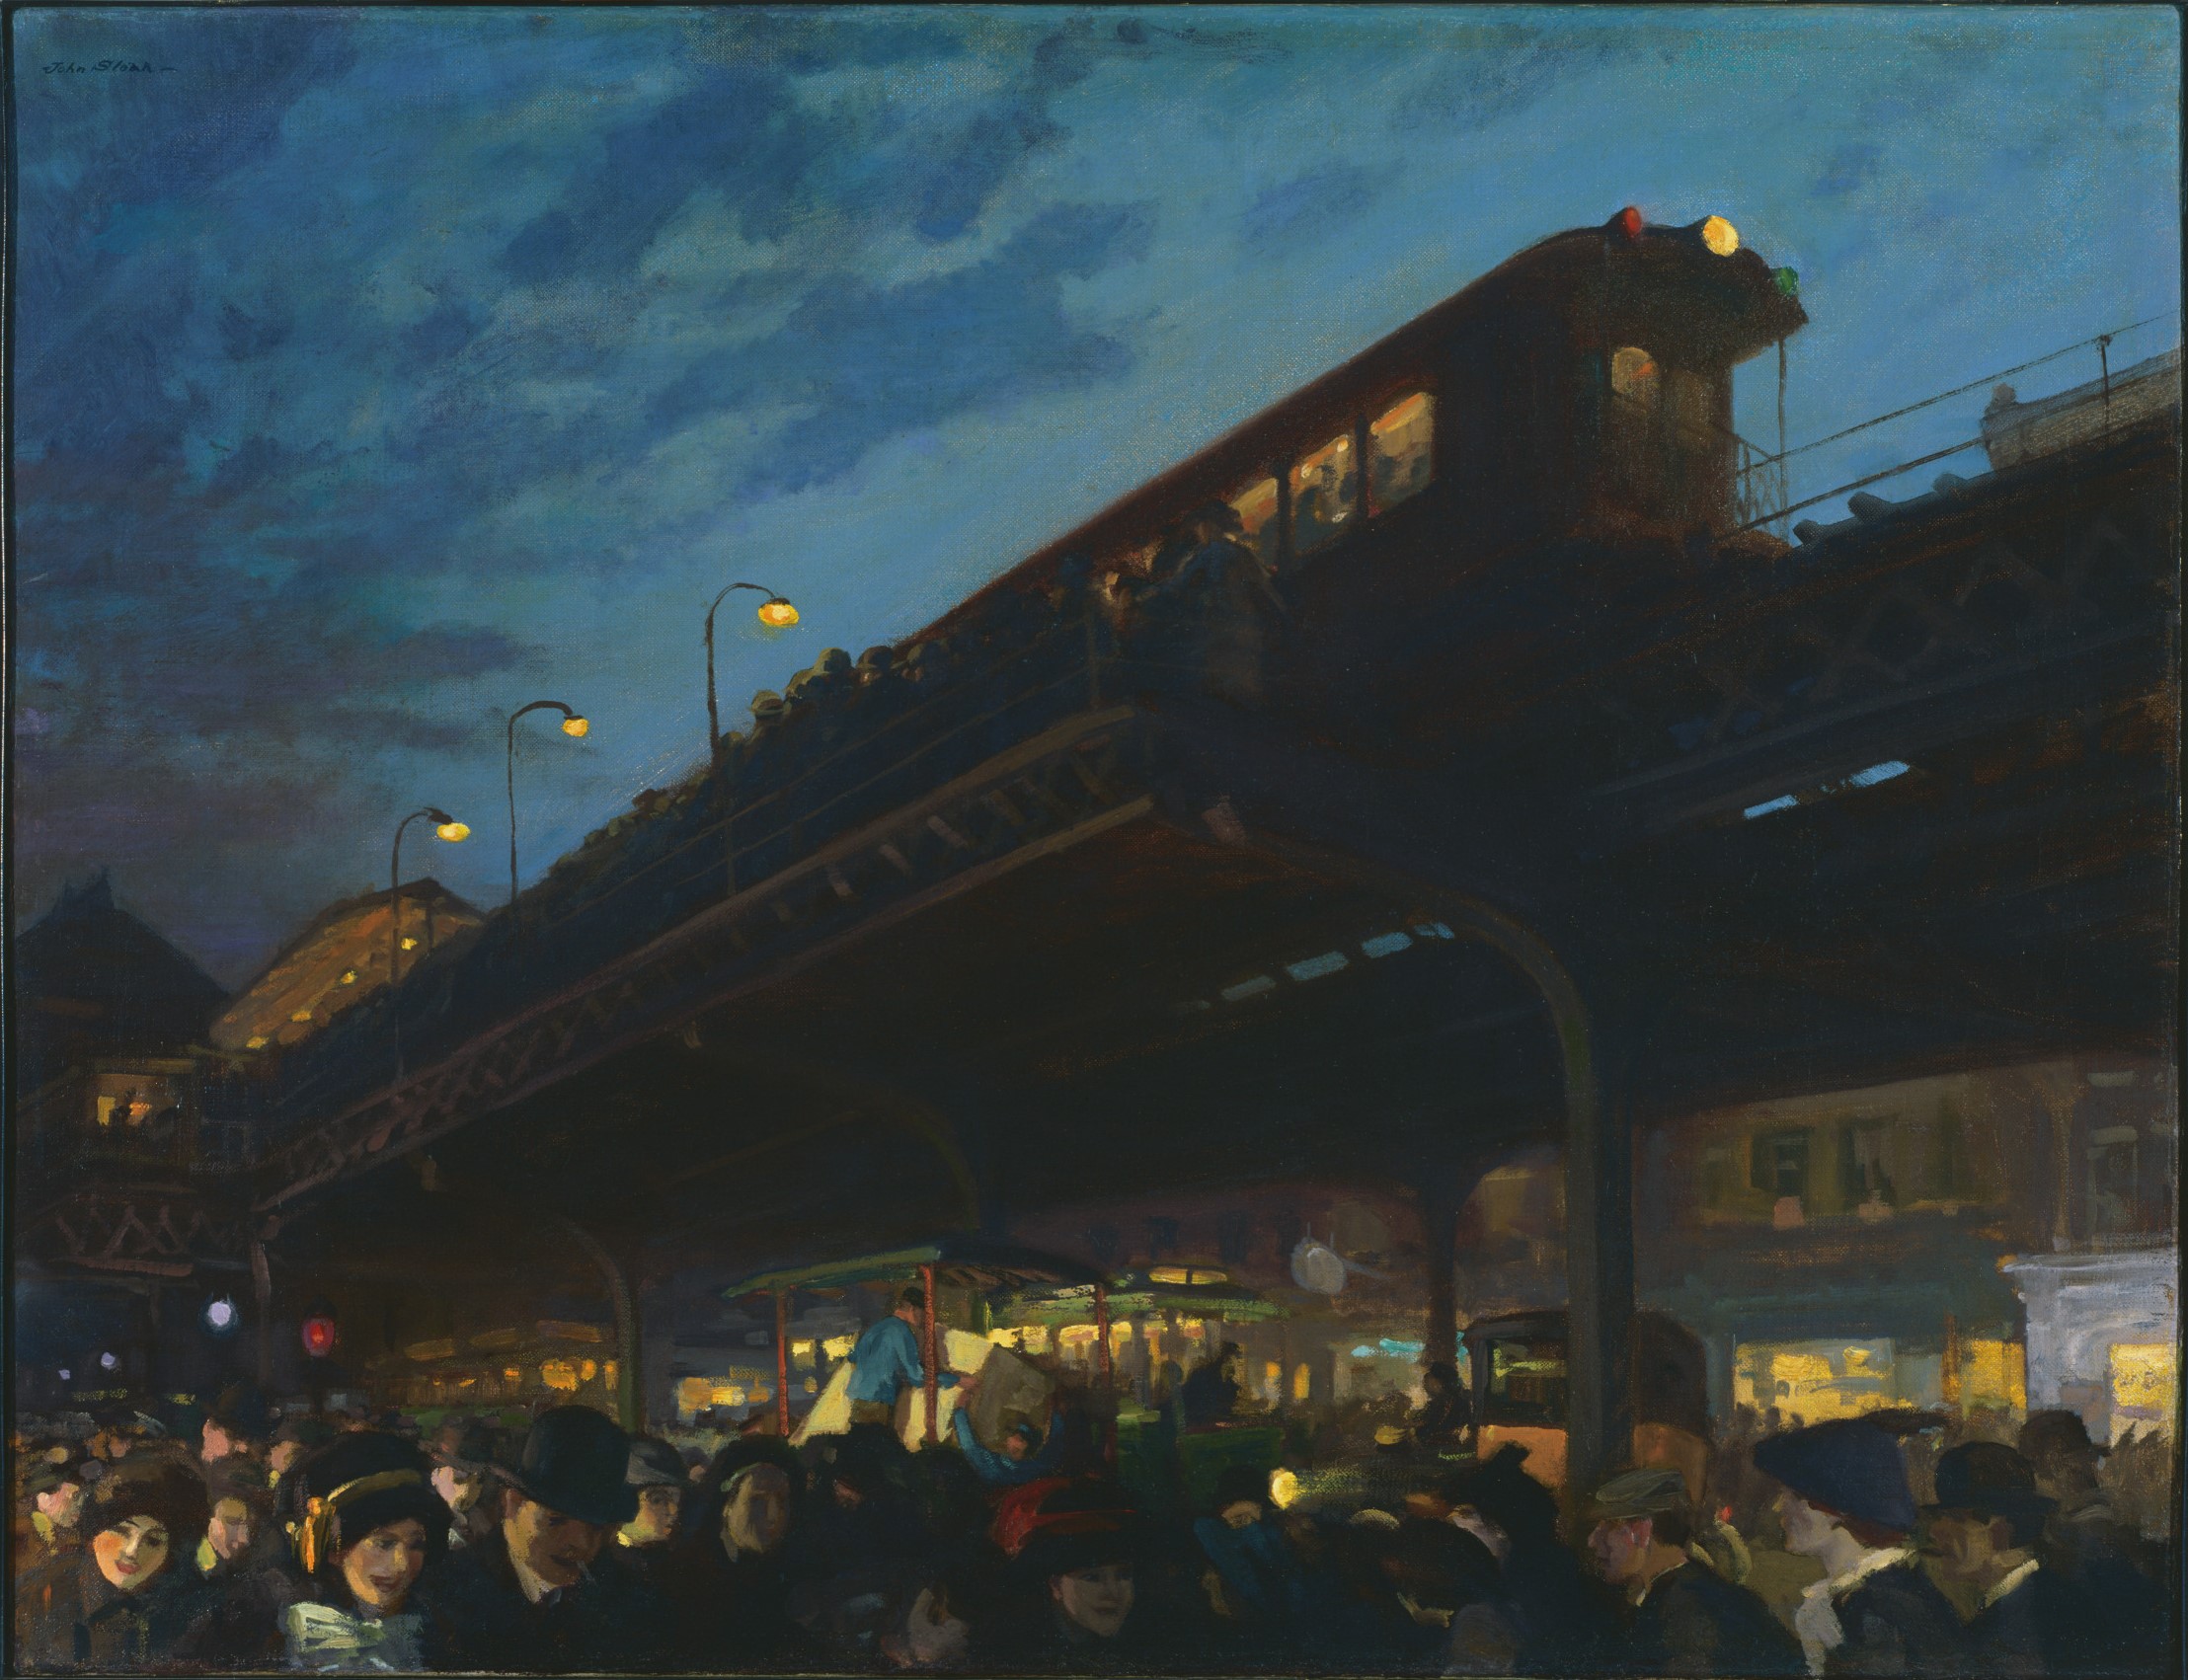 John Sloan, "Six O’Clock, Winter," 1912. Oil on canvas; 26 1/8 in. x 32 in. The Phillips Collection: Acquired 1922. © 2022 Delaware Art Museum / Artists Rights Society (ARS), New York. 